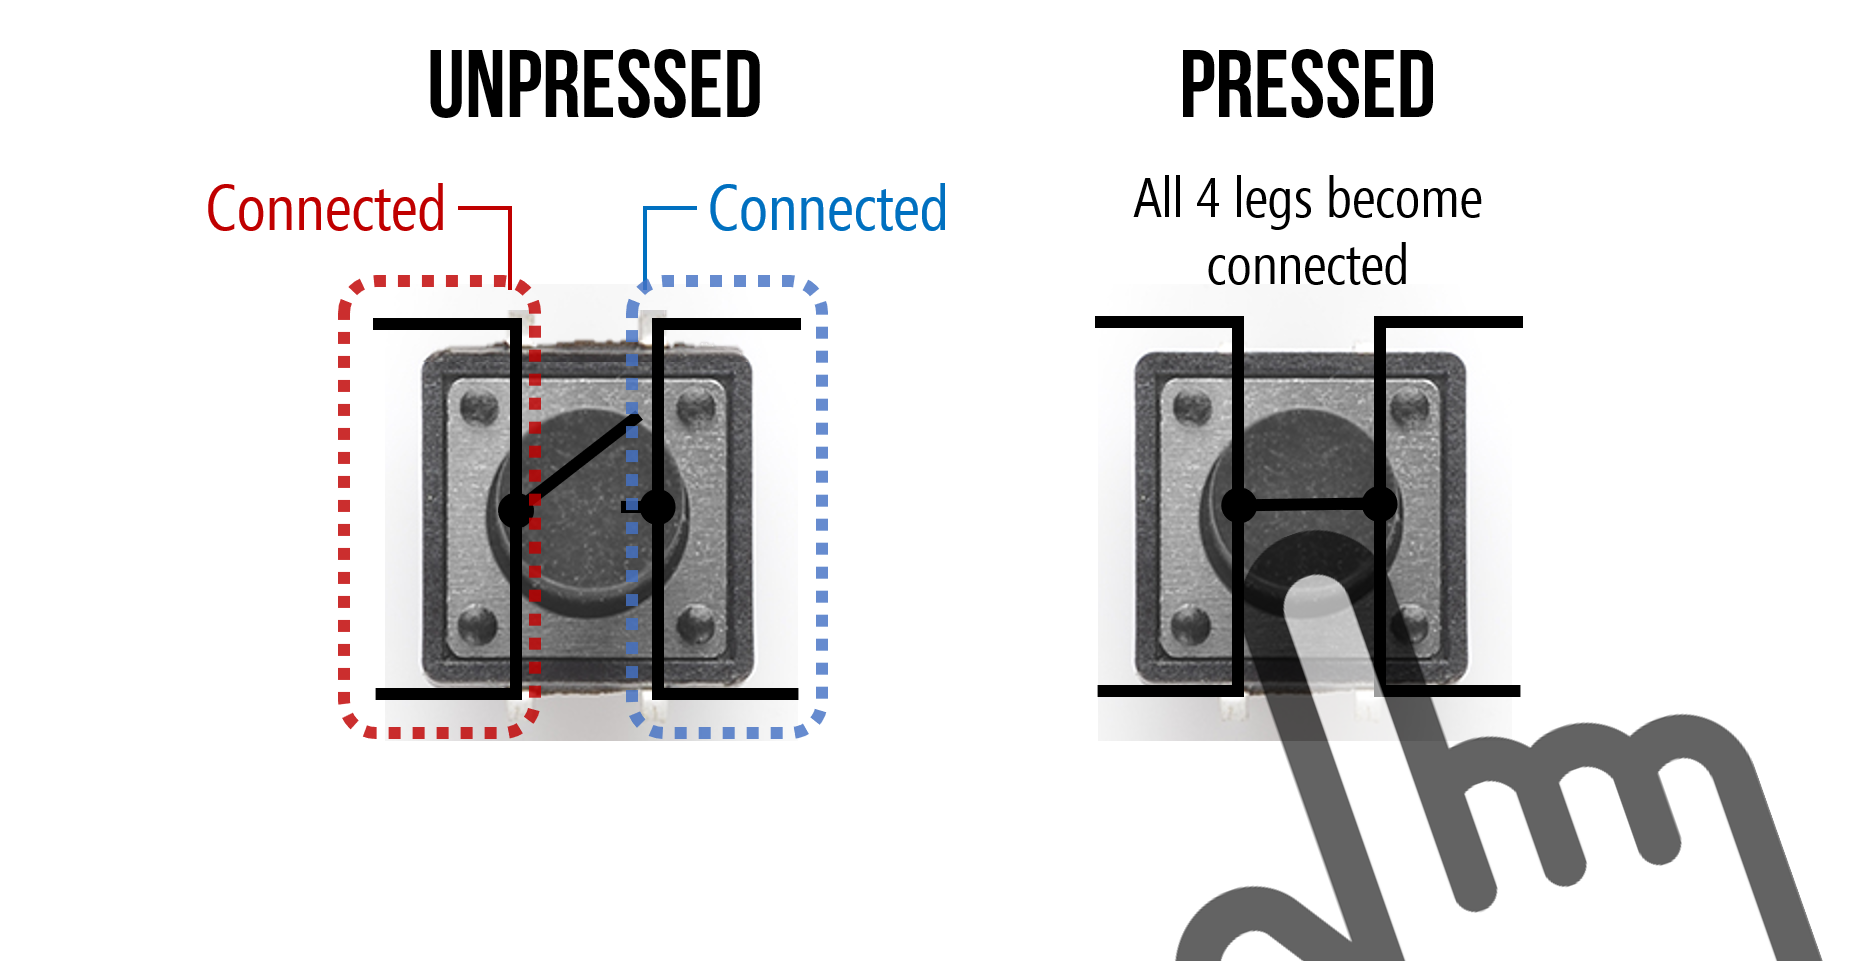 Overview of four-legged tactile buttons showing which two sides are disconnected by default and how the connections are formed when the button is pressed